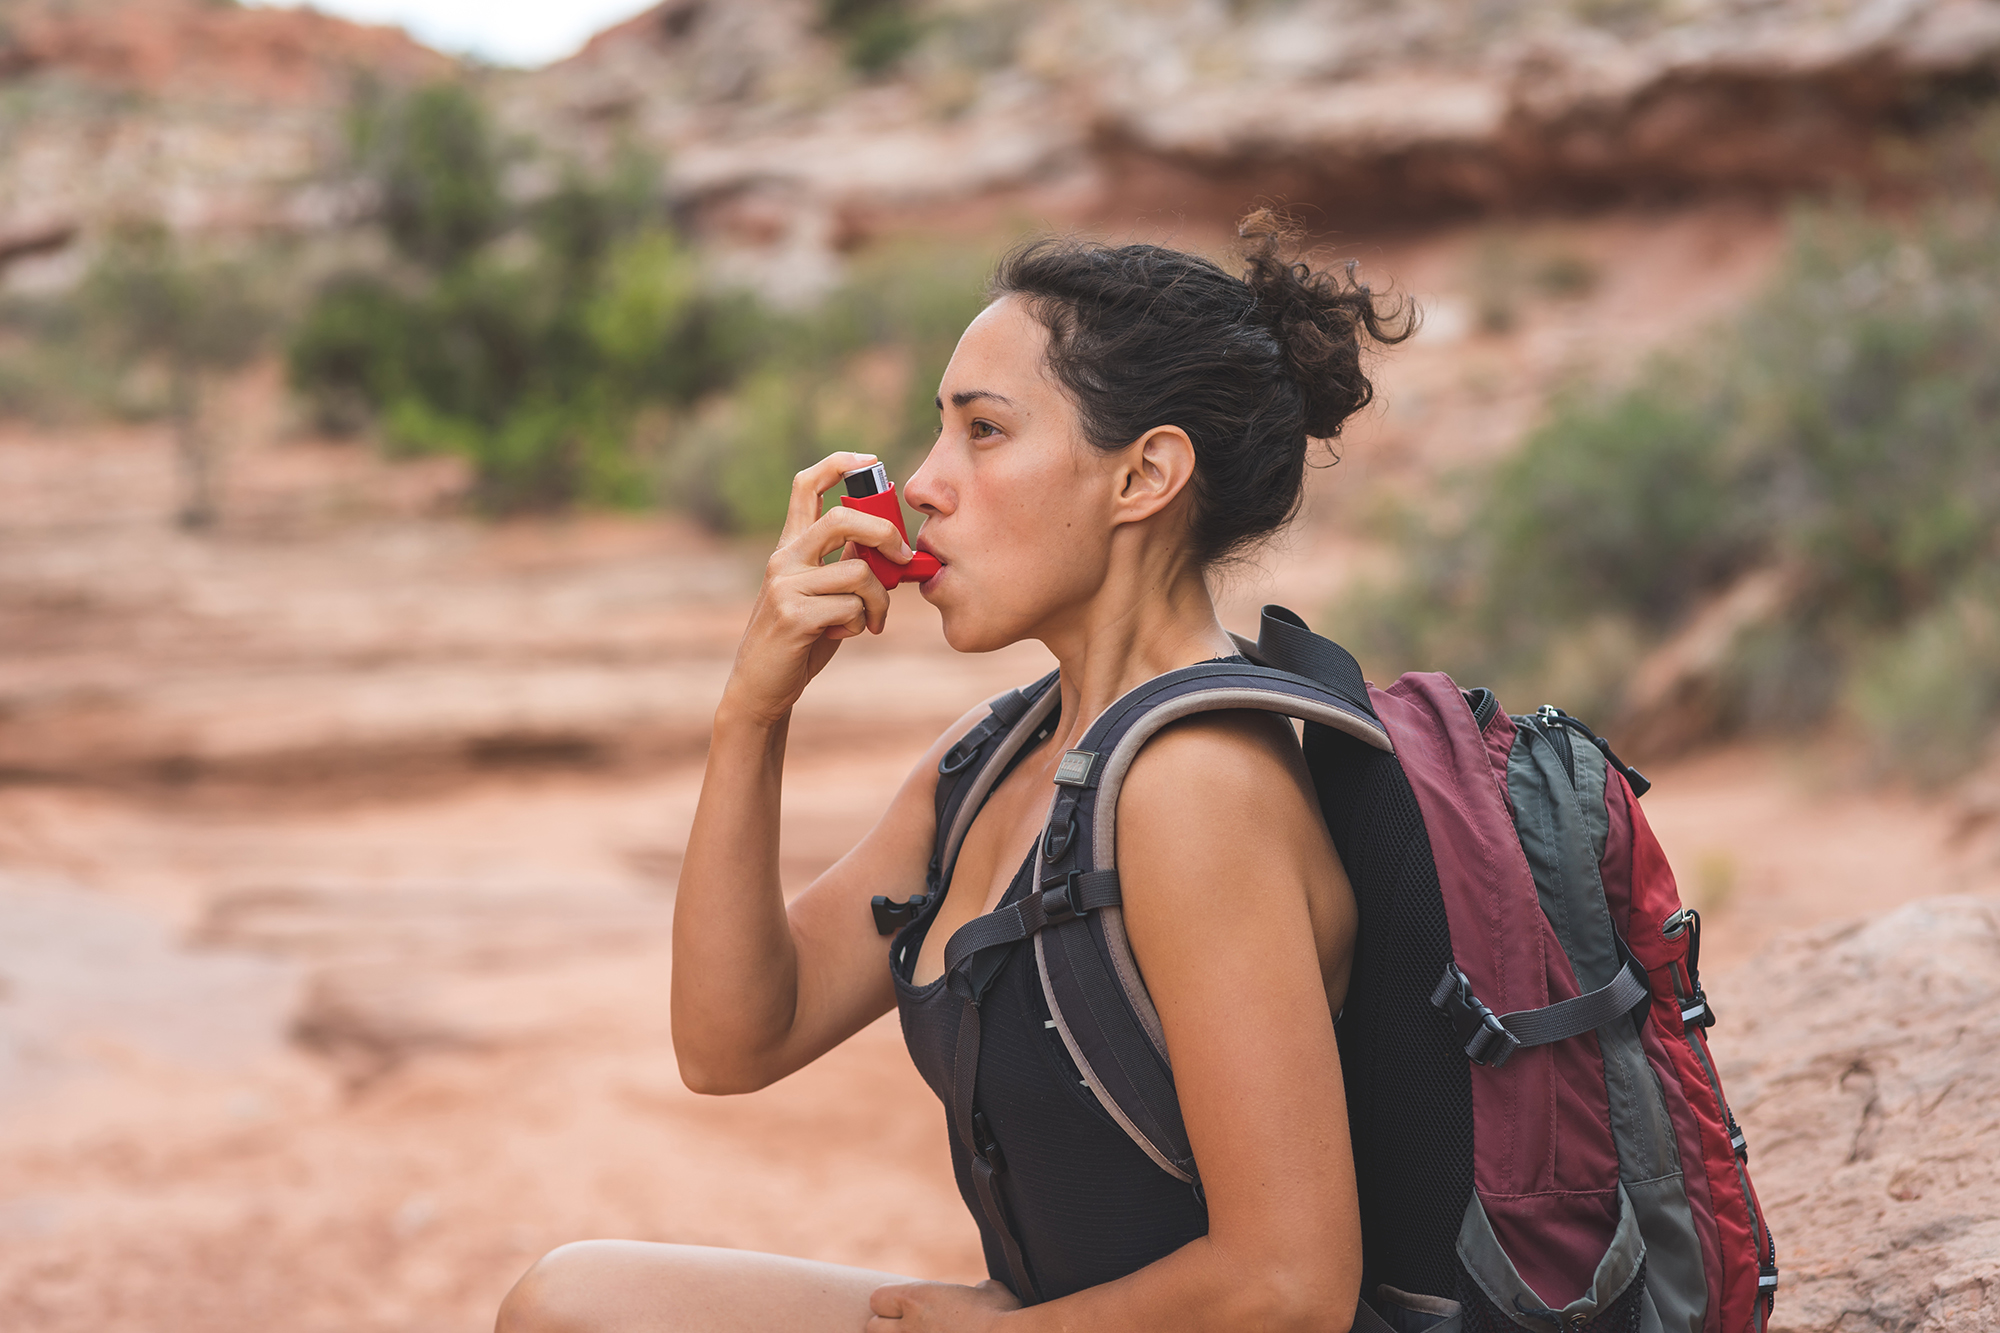 Woman With Chronic Asthma Hiking in Desert